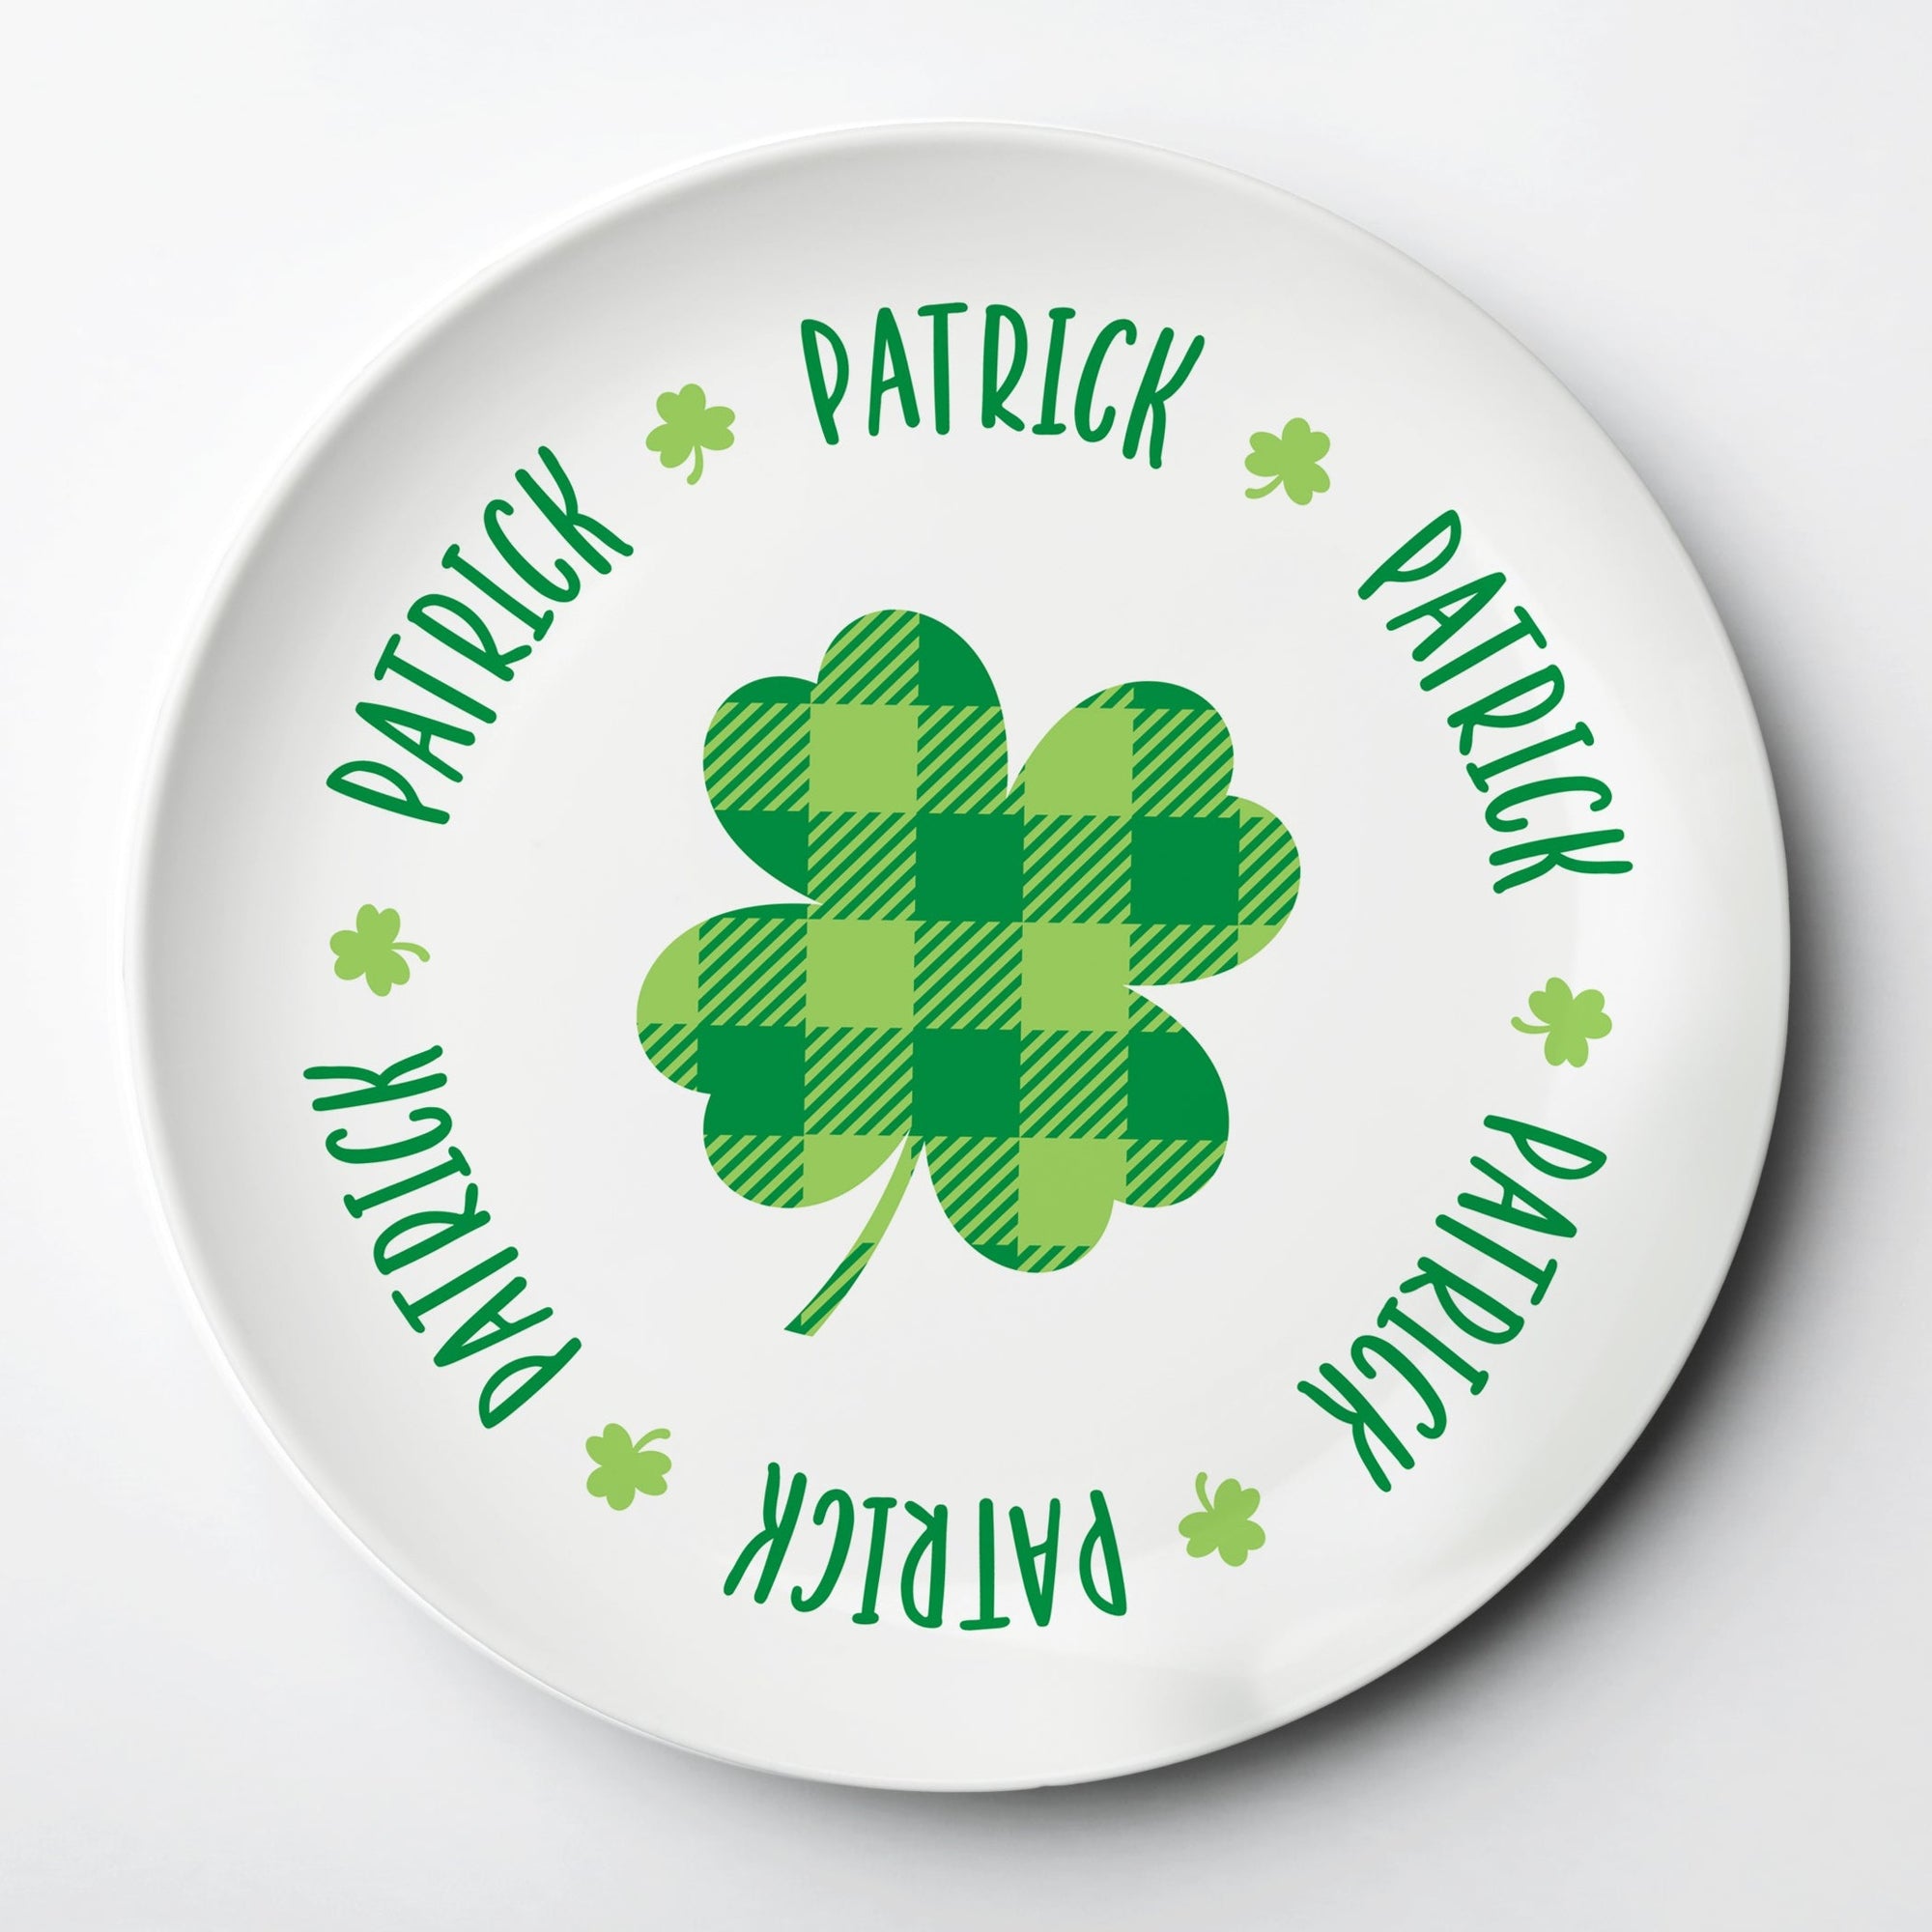 St. Patrick's Day plaid shamrock, clover, ThermoSāf® kids reusable plate, microwave, dishwasher and oven safe.  Made in the USA, Pipsy.com